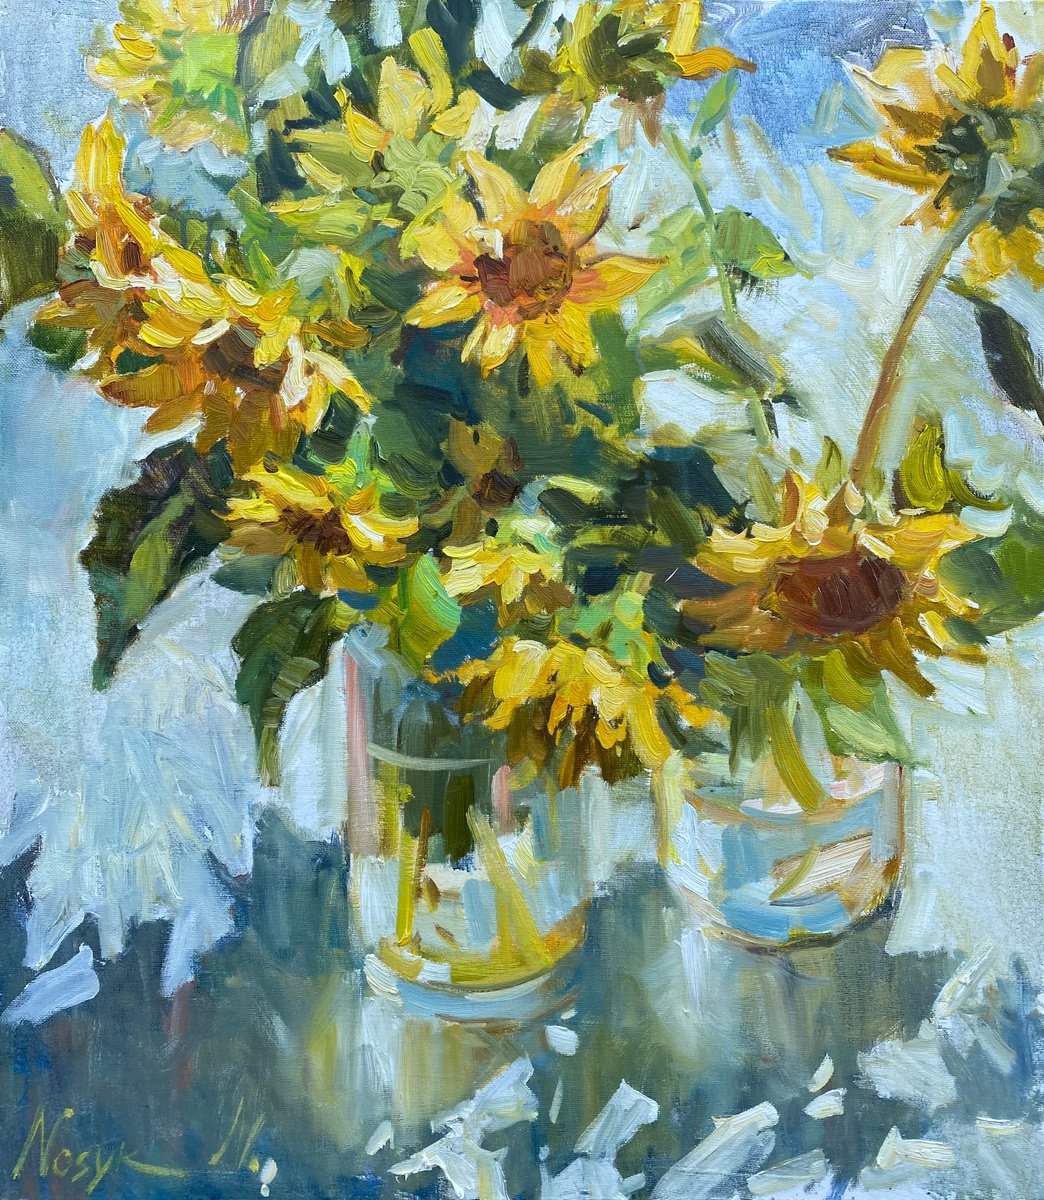 Sunny 80x70cm | oil painting on canvas flowers by Nataliia Nosyk